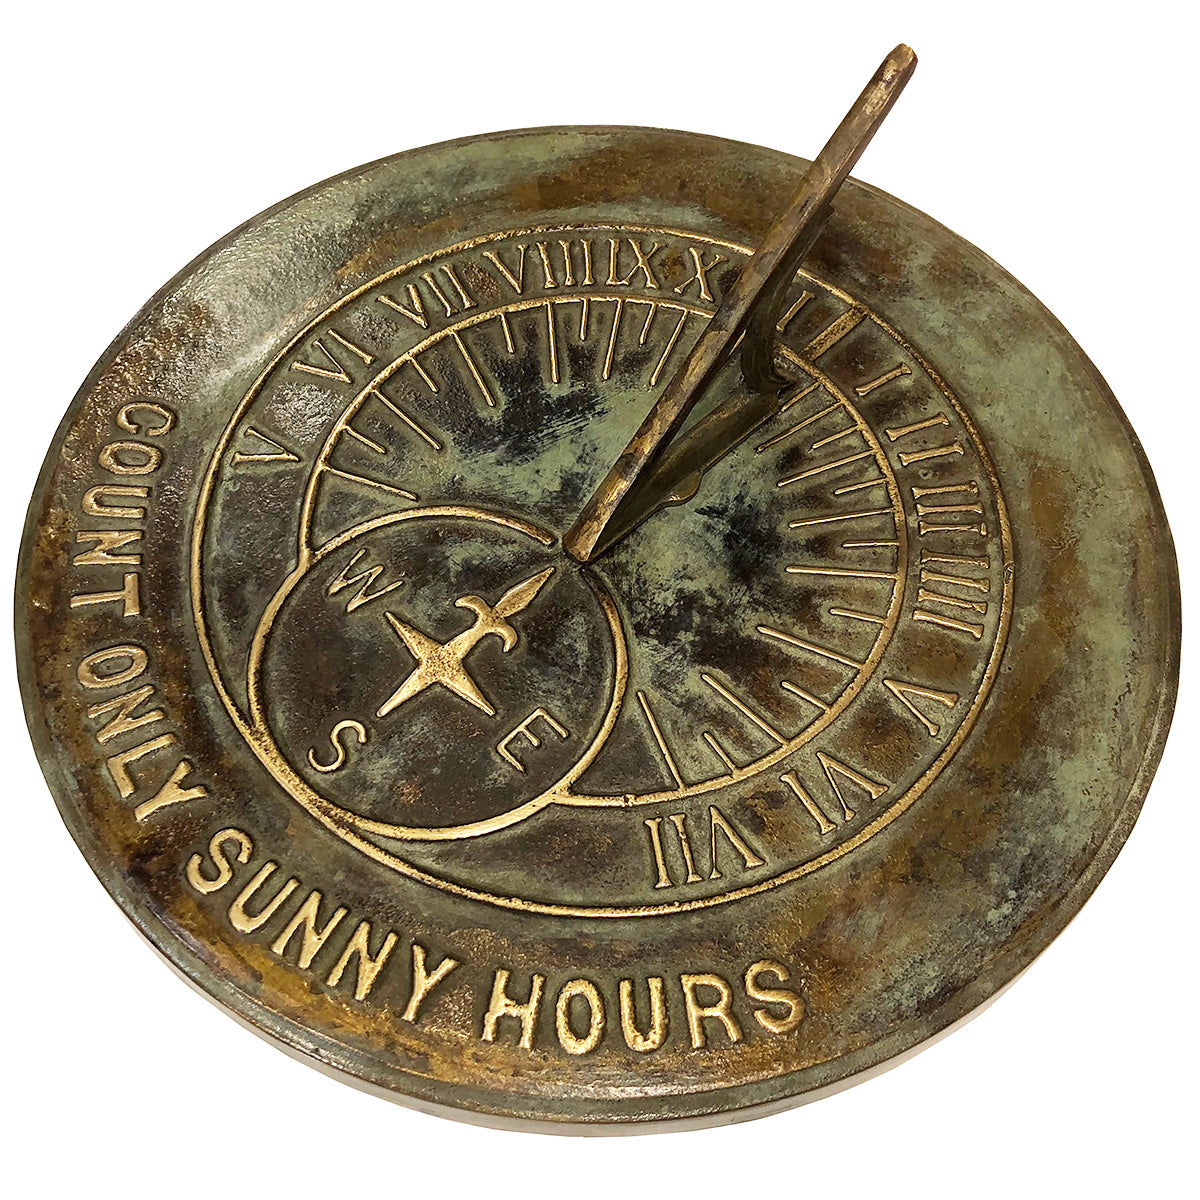 Solid Brass Count Sunny Hours Sundial, 10 3/8" dia. Rome #2120